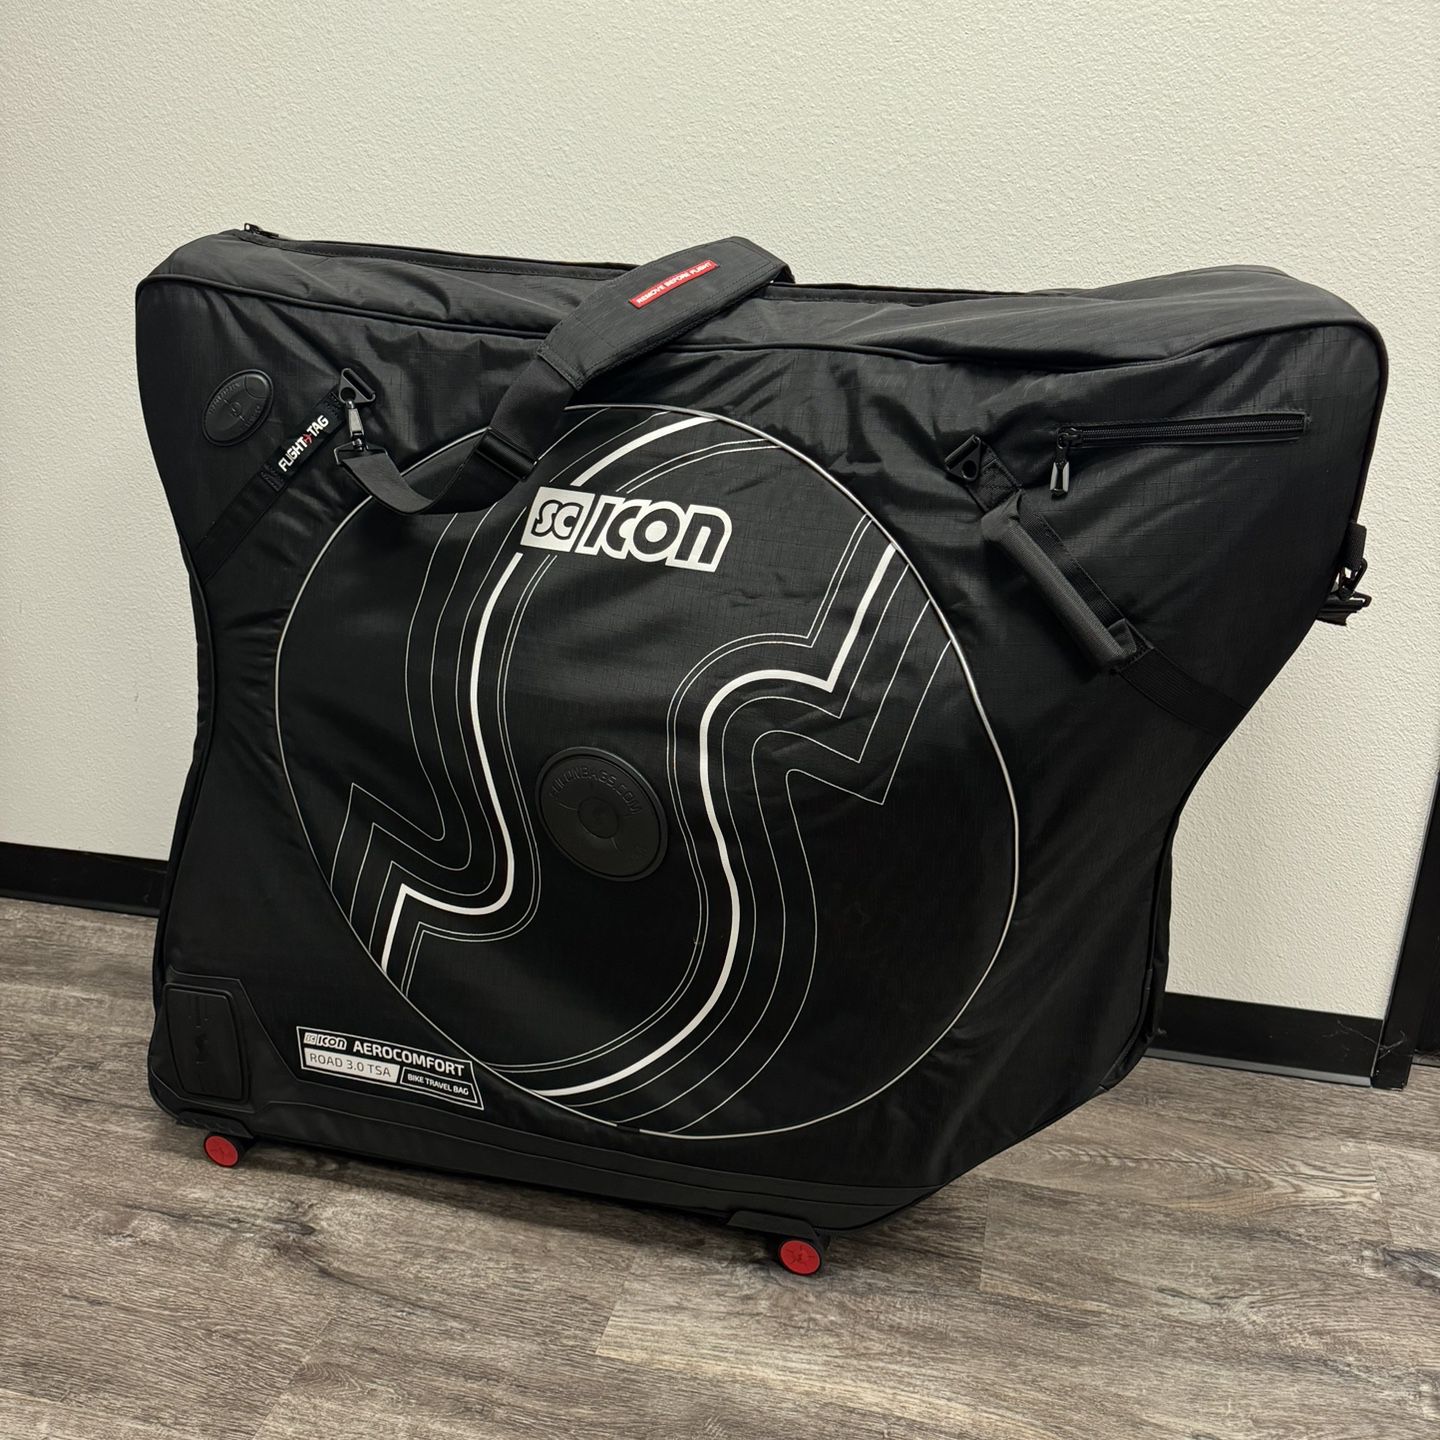 Scicon Road 3.0 Cycling Travel Bag Bike Bicycle 